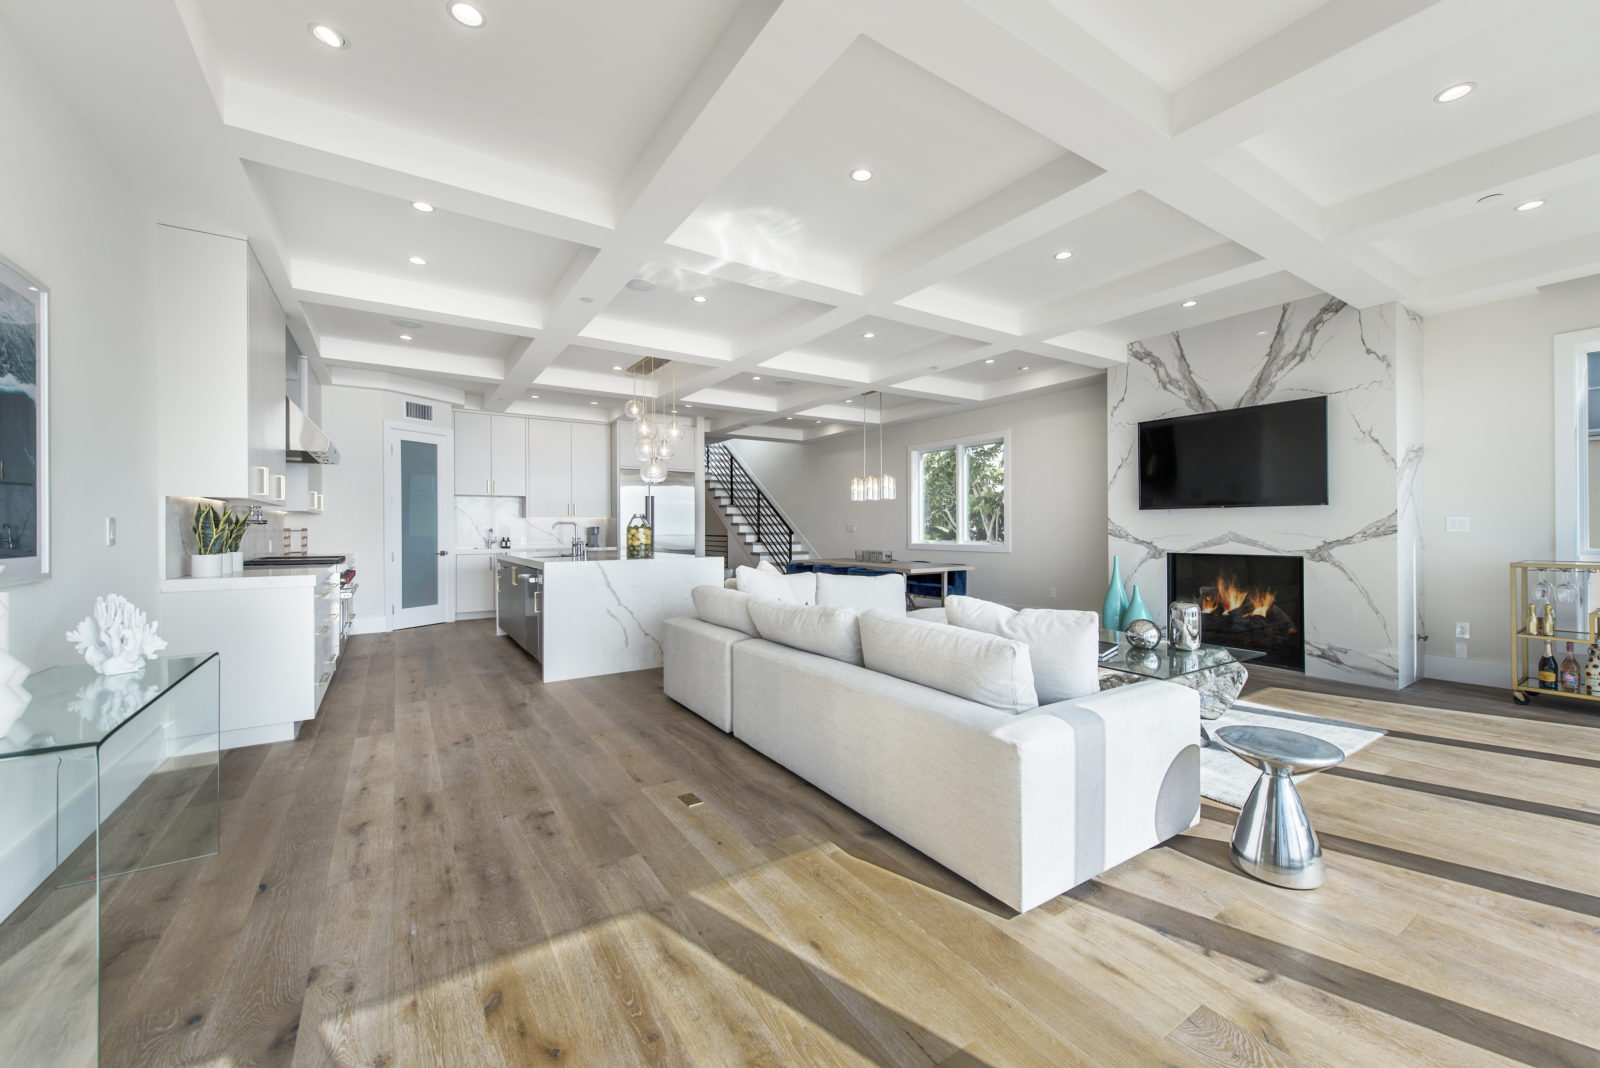 Luxury homes in the South Bay